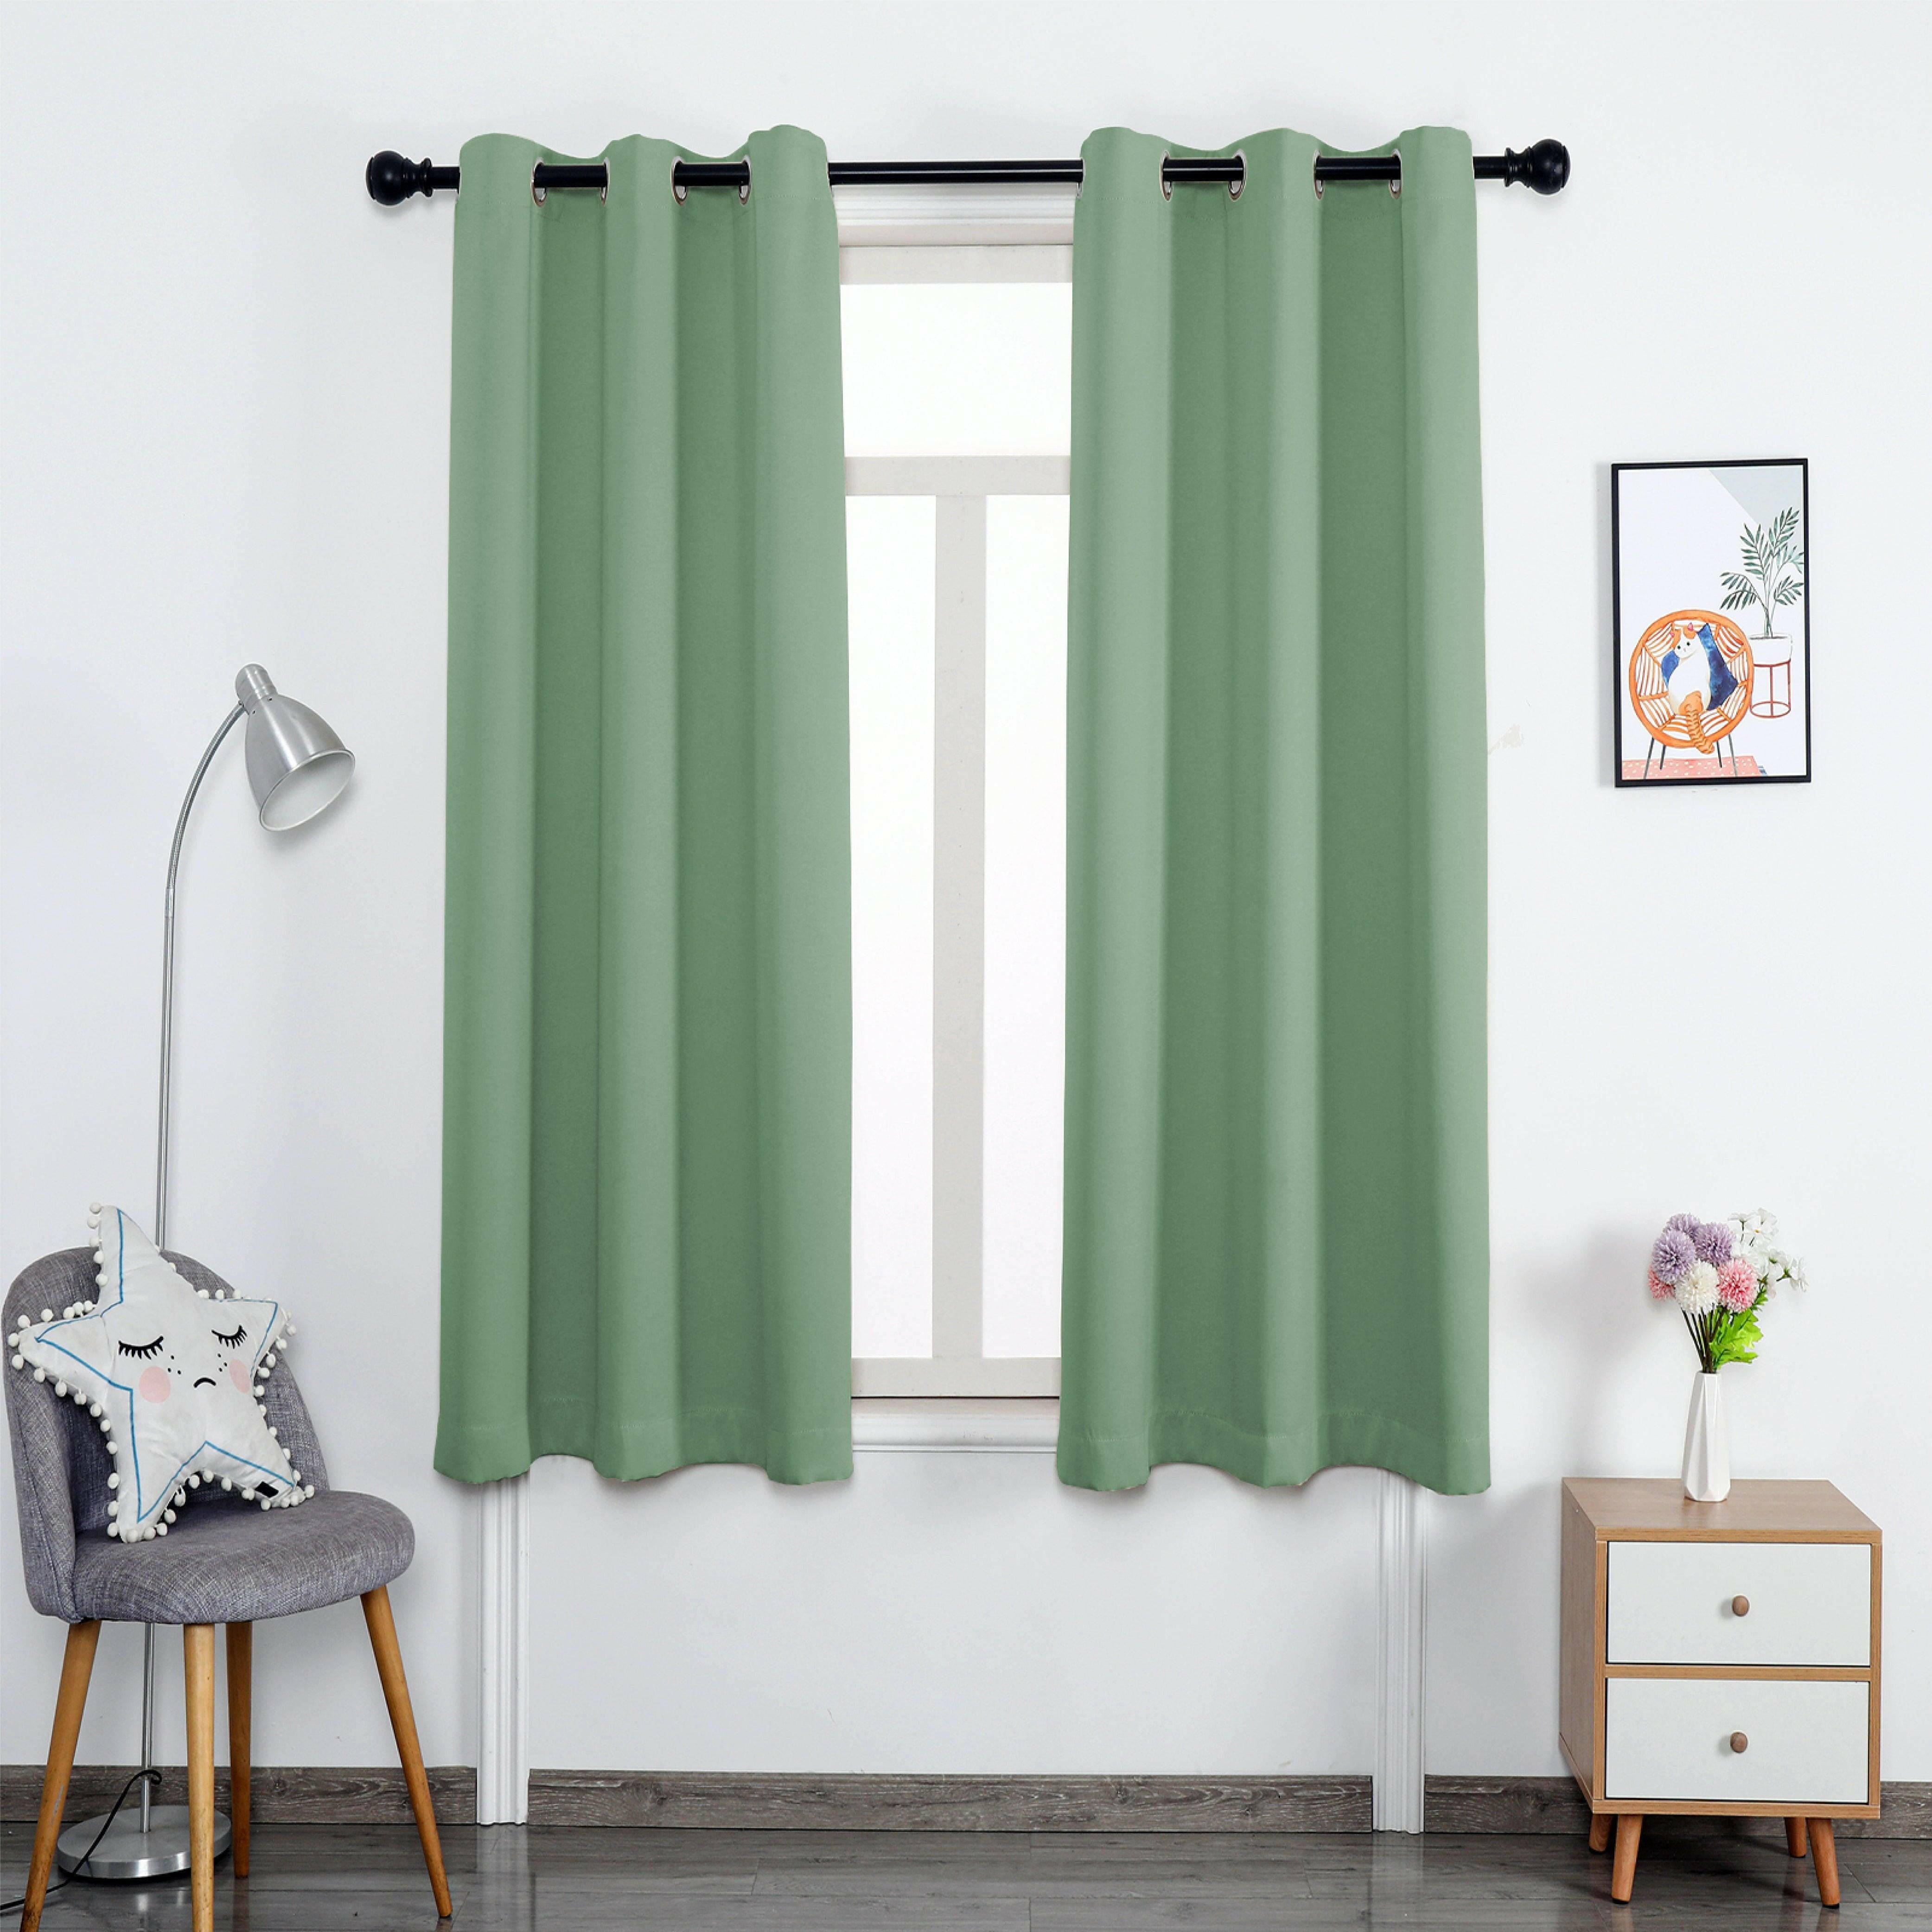 Hyper Cover 3-Layers Blockout Curtains Emerald | Window Curtains | Brilliant Home Living